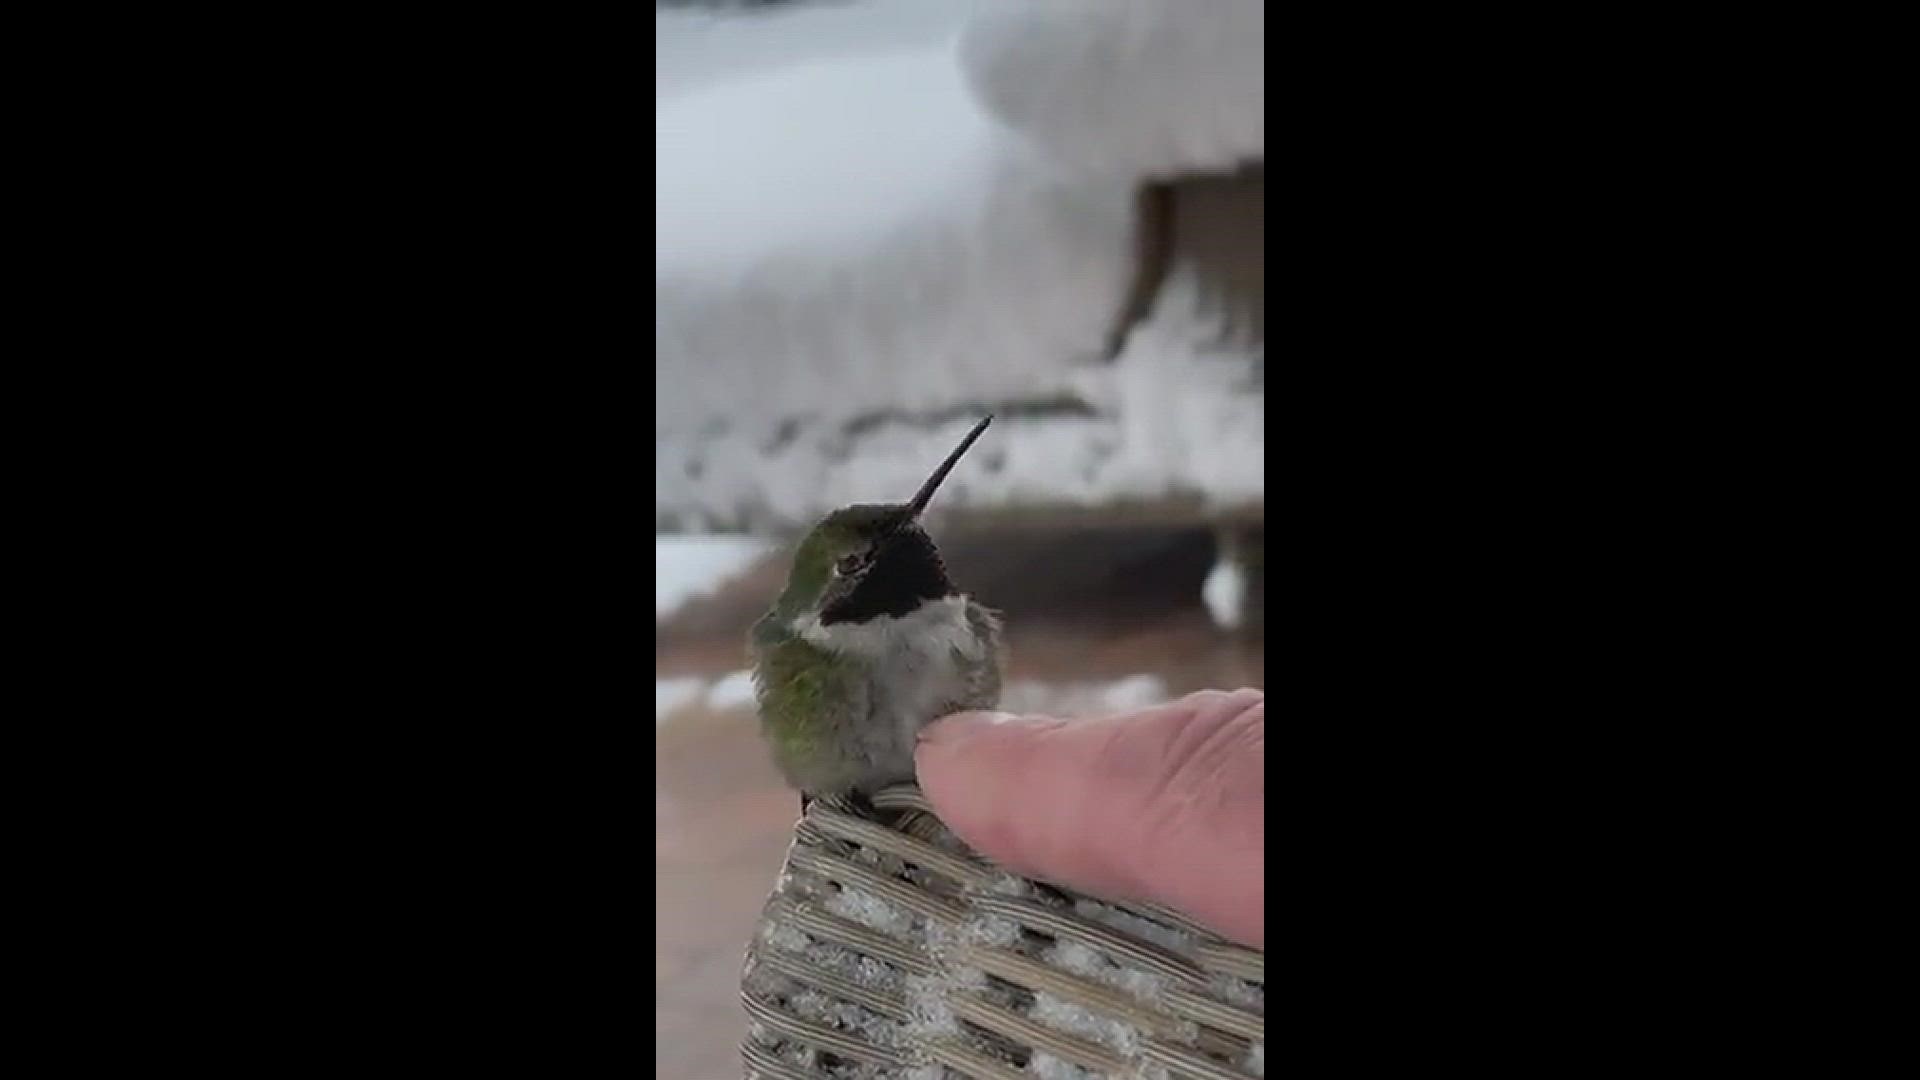 Humming birds need belly rubs and foot warmers!
Credit: Alan Parkes